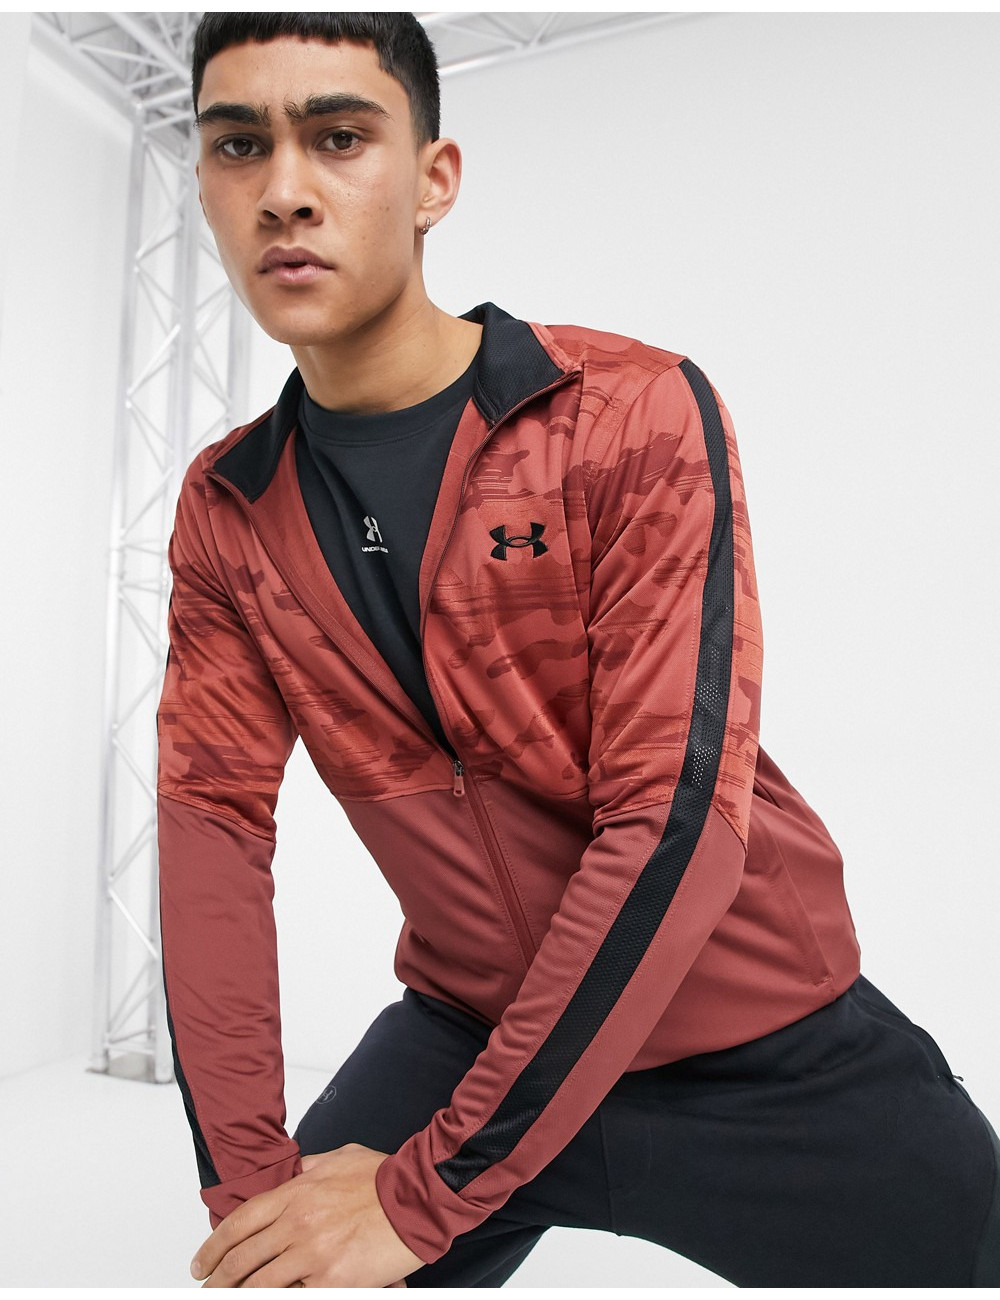 Under Armour jacket in red